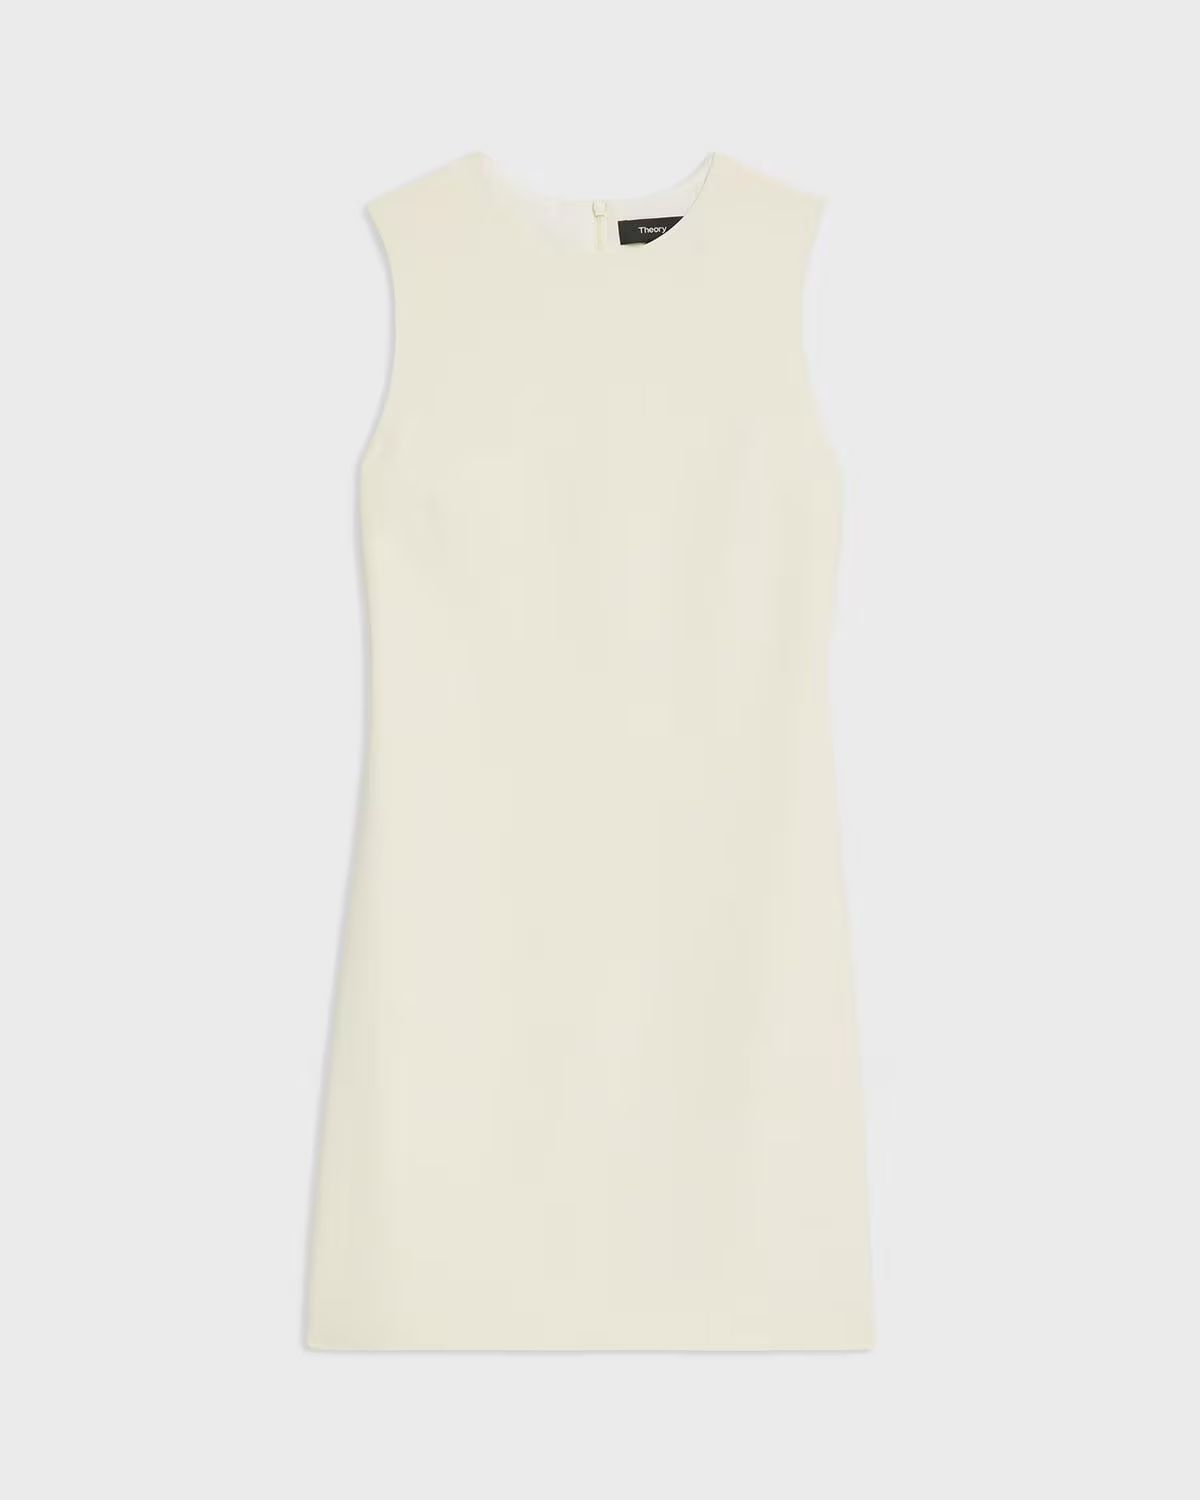 Shift Dress in Admiral Crepe | Theory UK